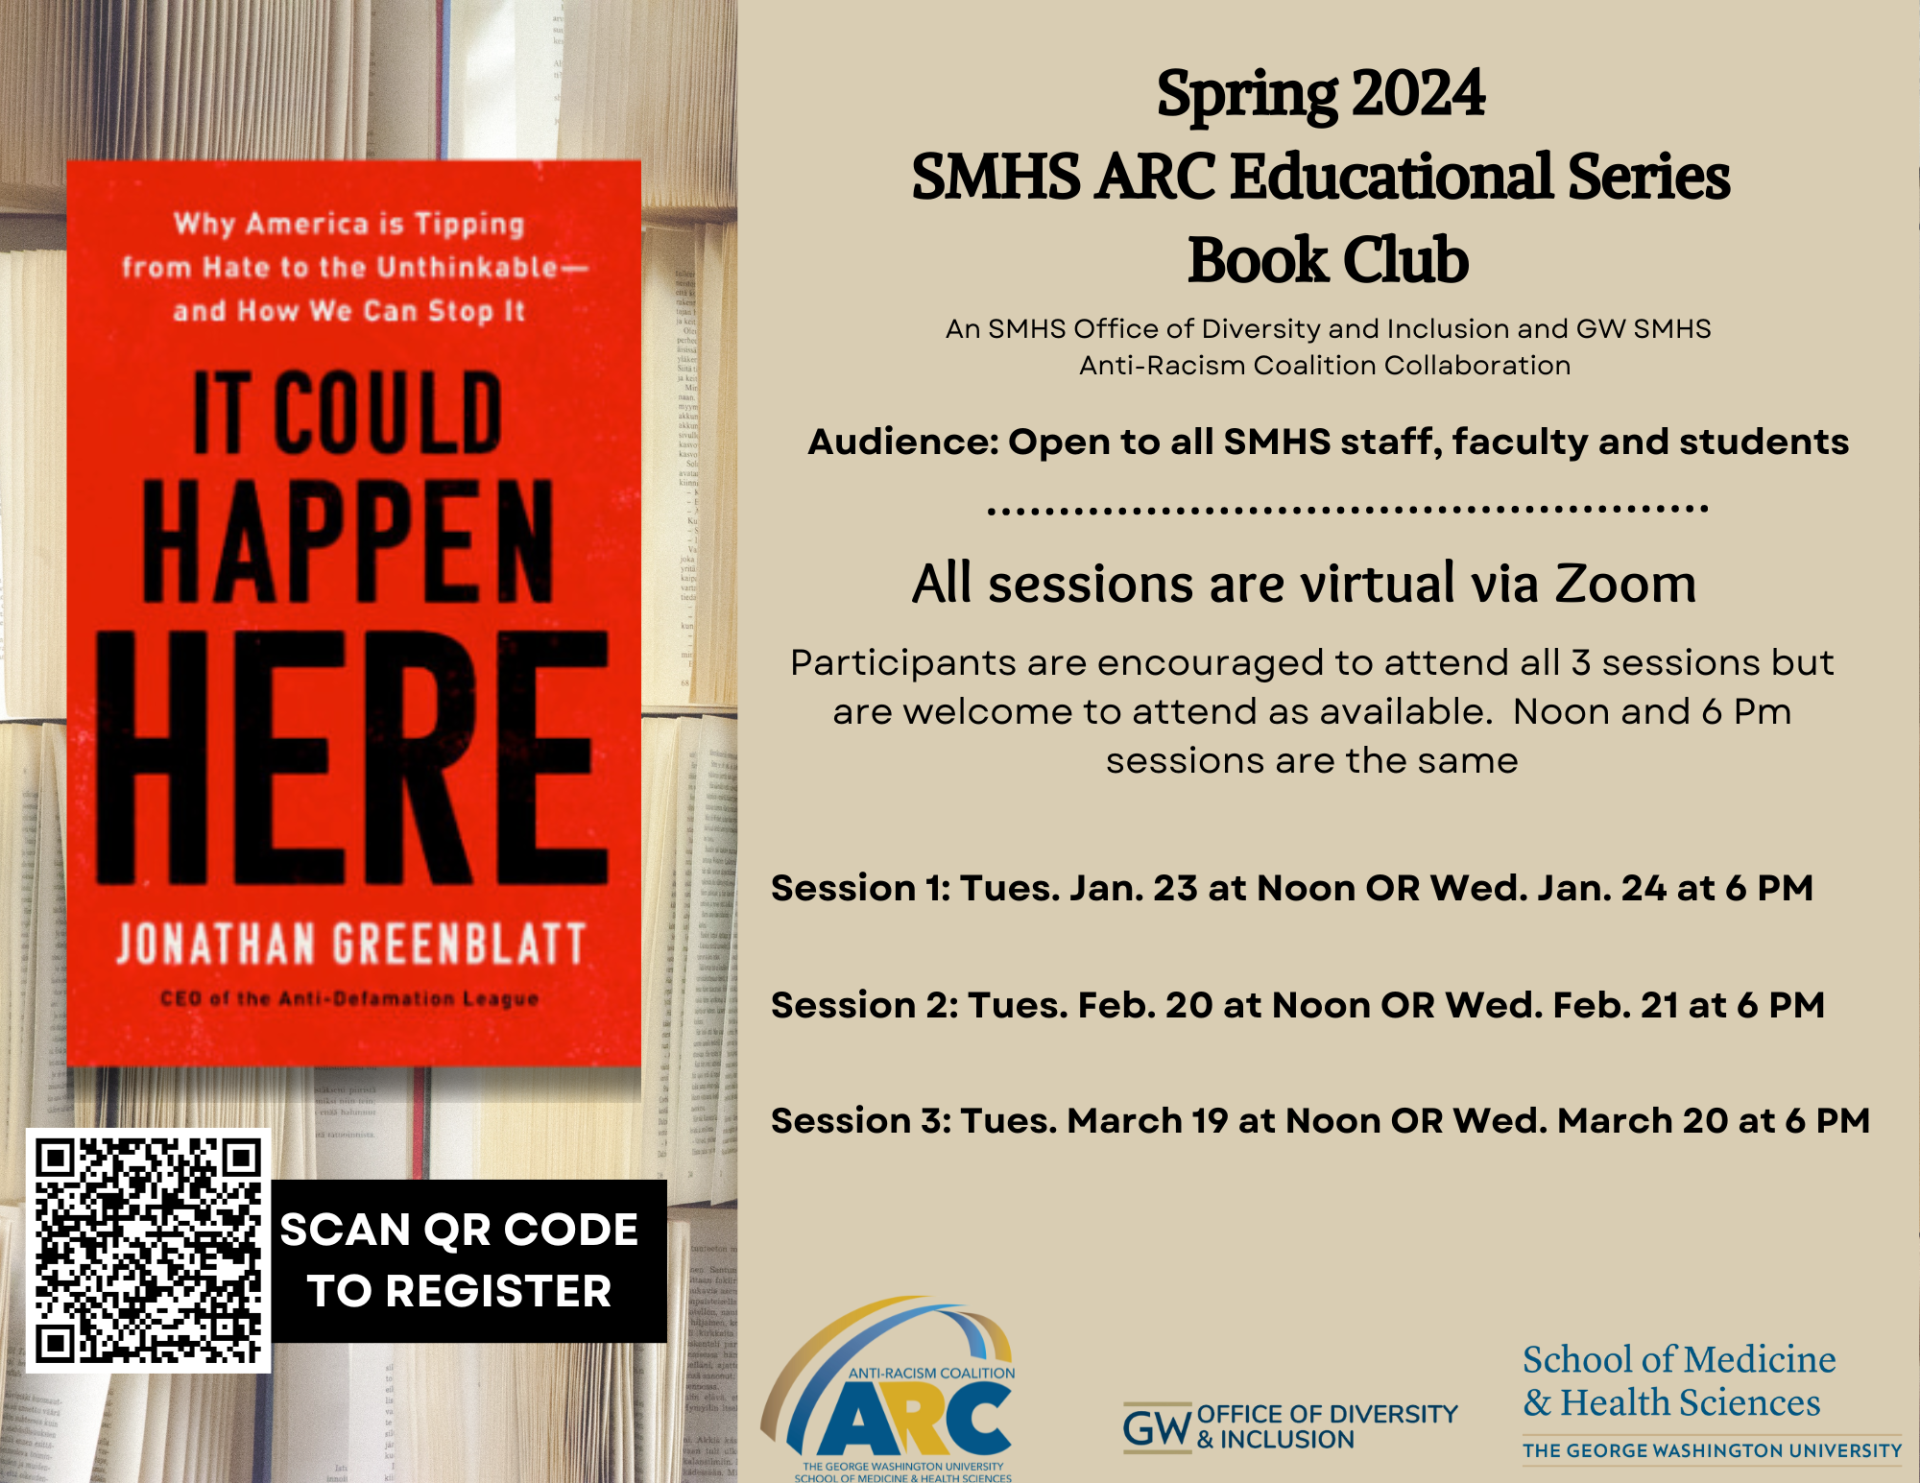 Left: book cover for it could happen here; right: Spring 2024 book club with session dates of 1/23, 1/24, 2/20, 2/21, 3/19, and 3/20